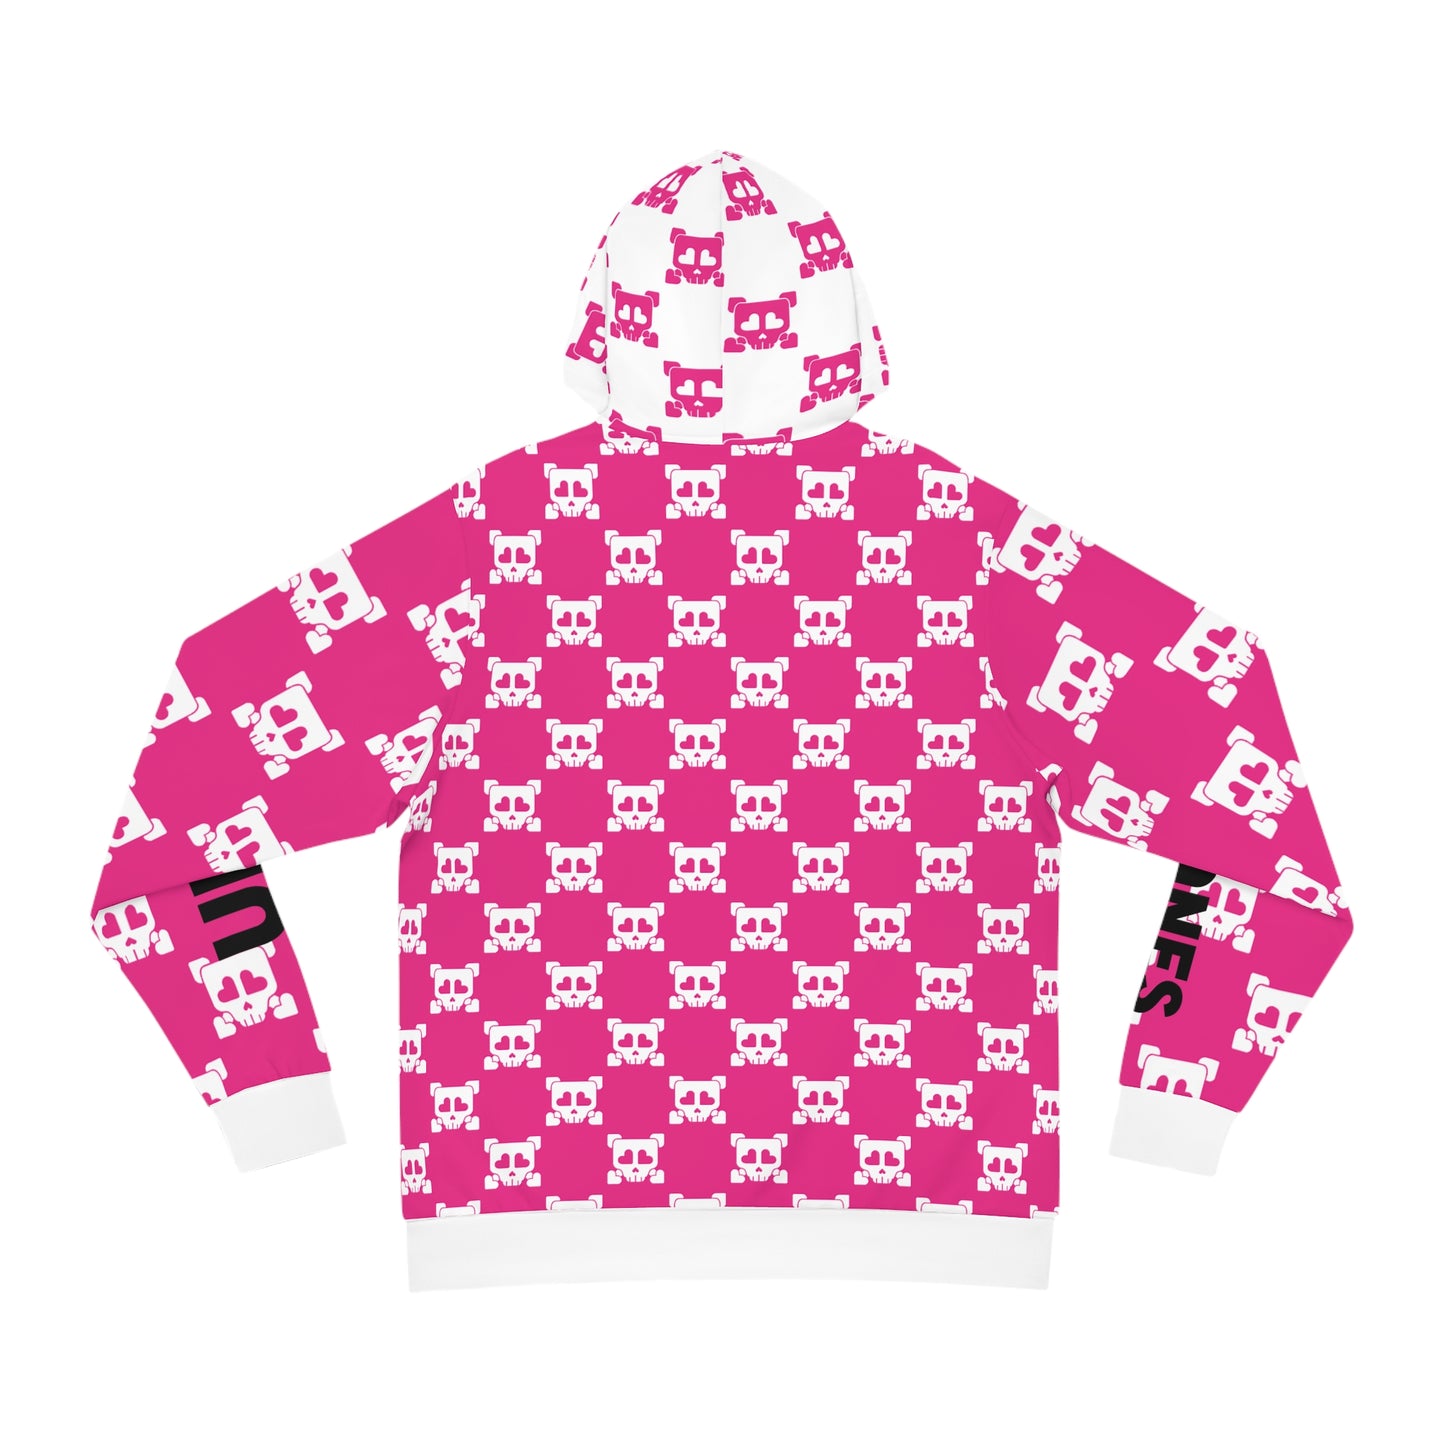 B-Side Bones Up Hoodie - Pink and White v1